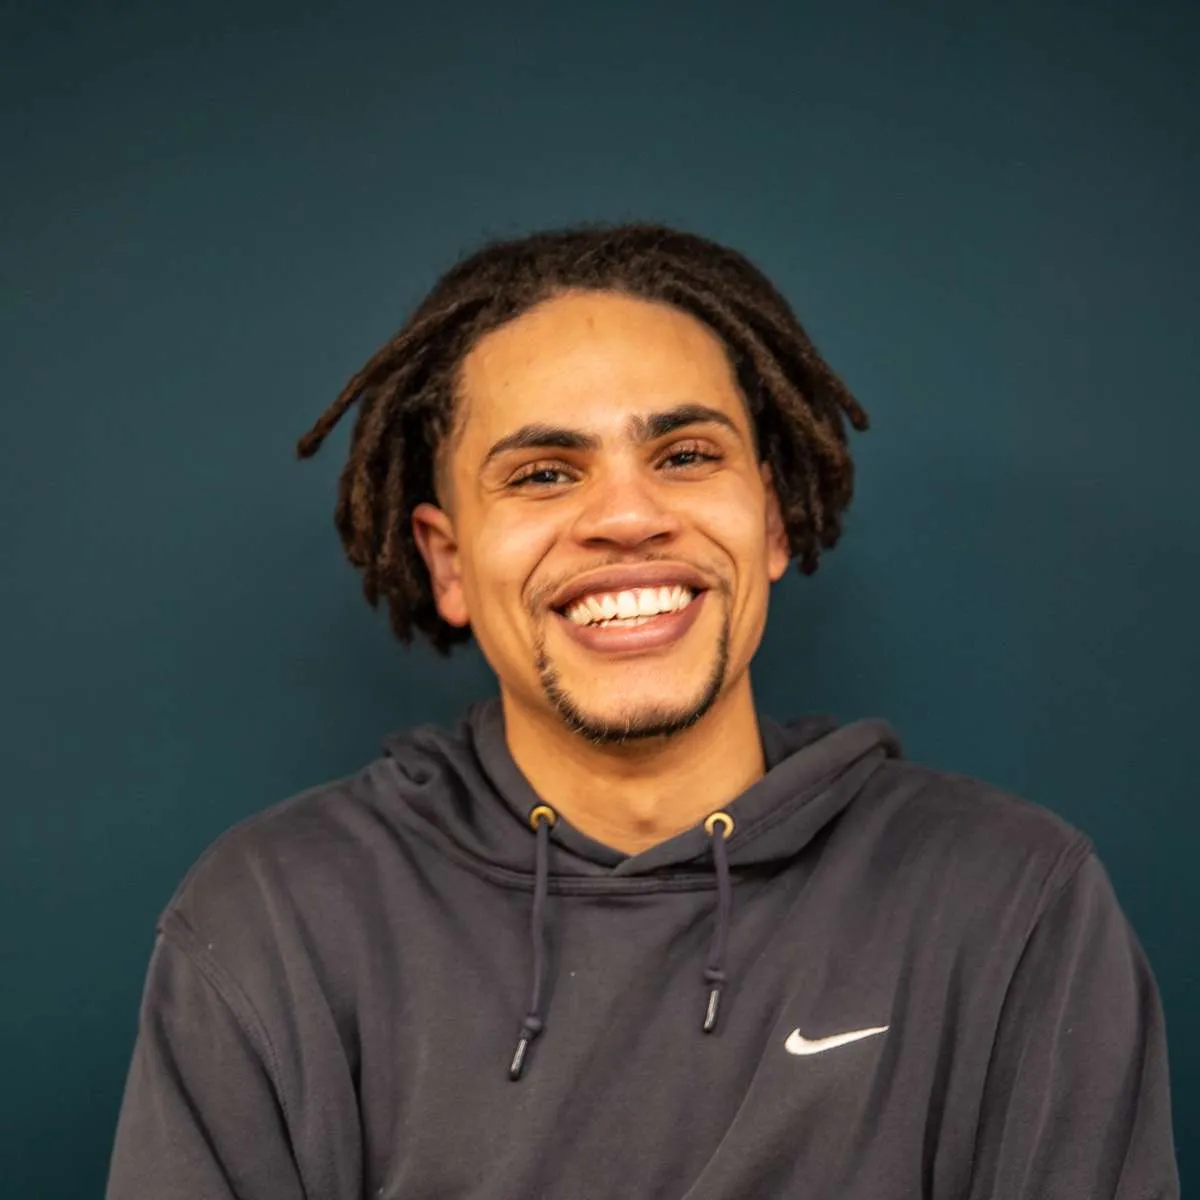 A cheerful young man with dreadlocks smiling broadly in front of a teal background, wearing a dark hoodie with the AV company logo.